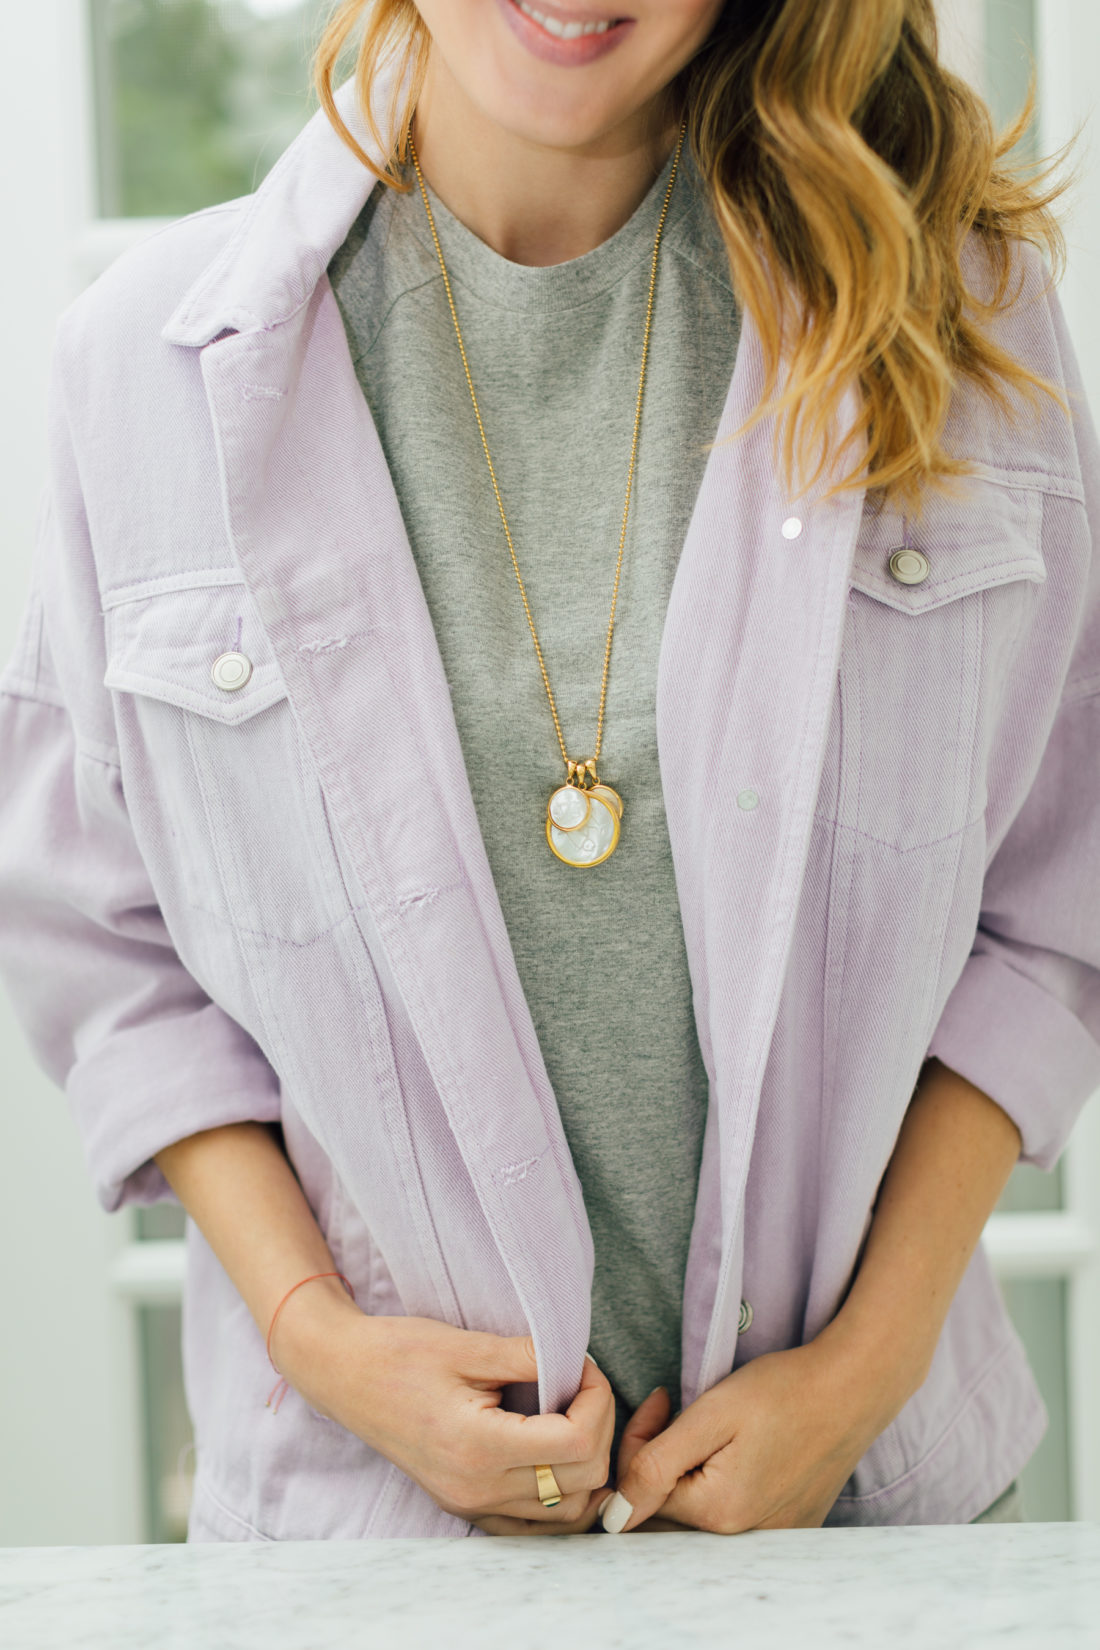 Eva Amurri Martino shares her September 2019 Obsessions which includes this ASHA Mother Of Pearl Customizable Necklace